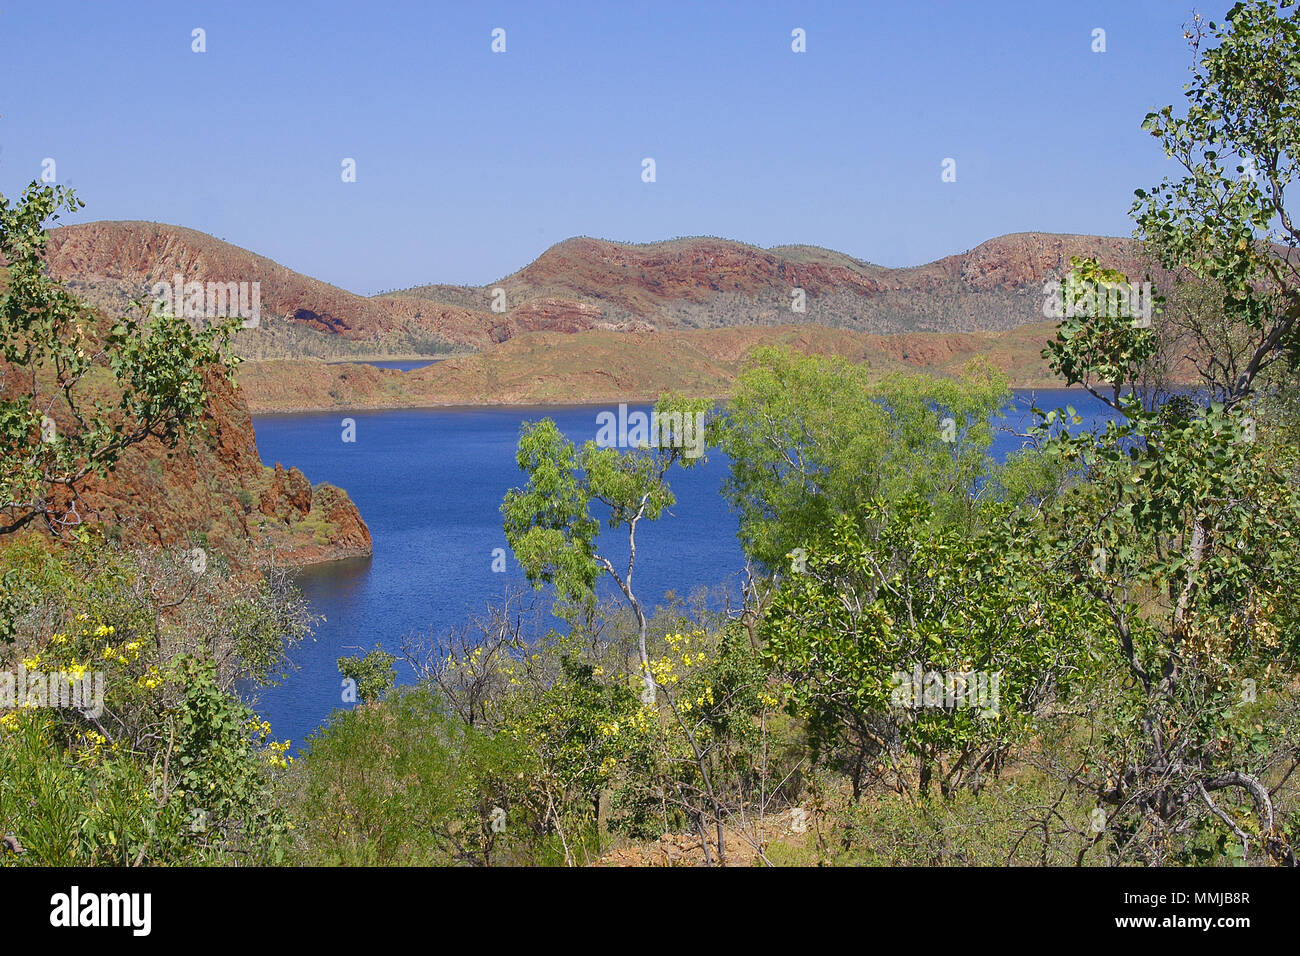 Lake Argyle is WA's largest and Australia's second largest freshwater man-made reservoir by volume. The reservoir is part of the Ord River Scheme. Stock Photo